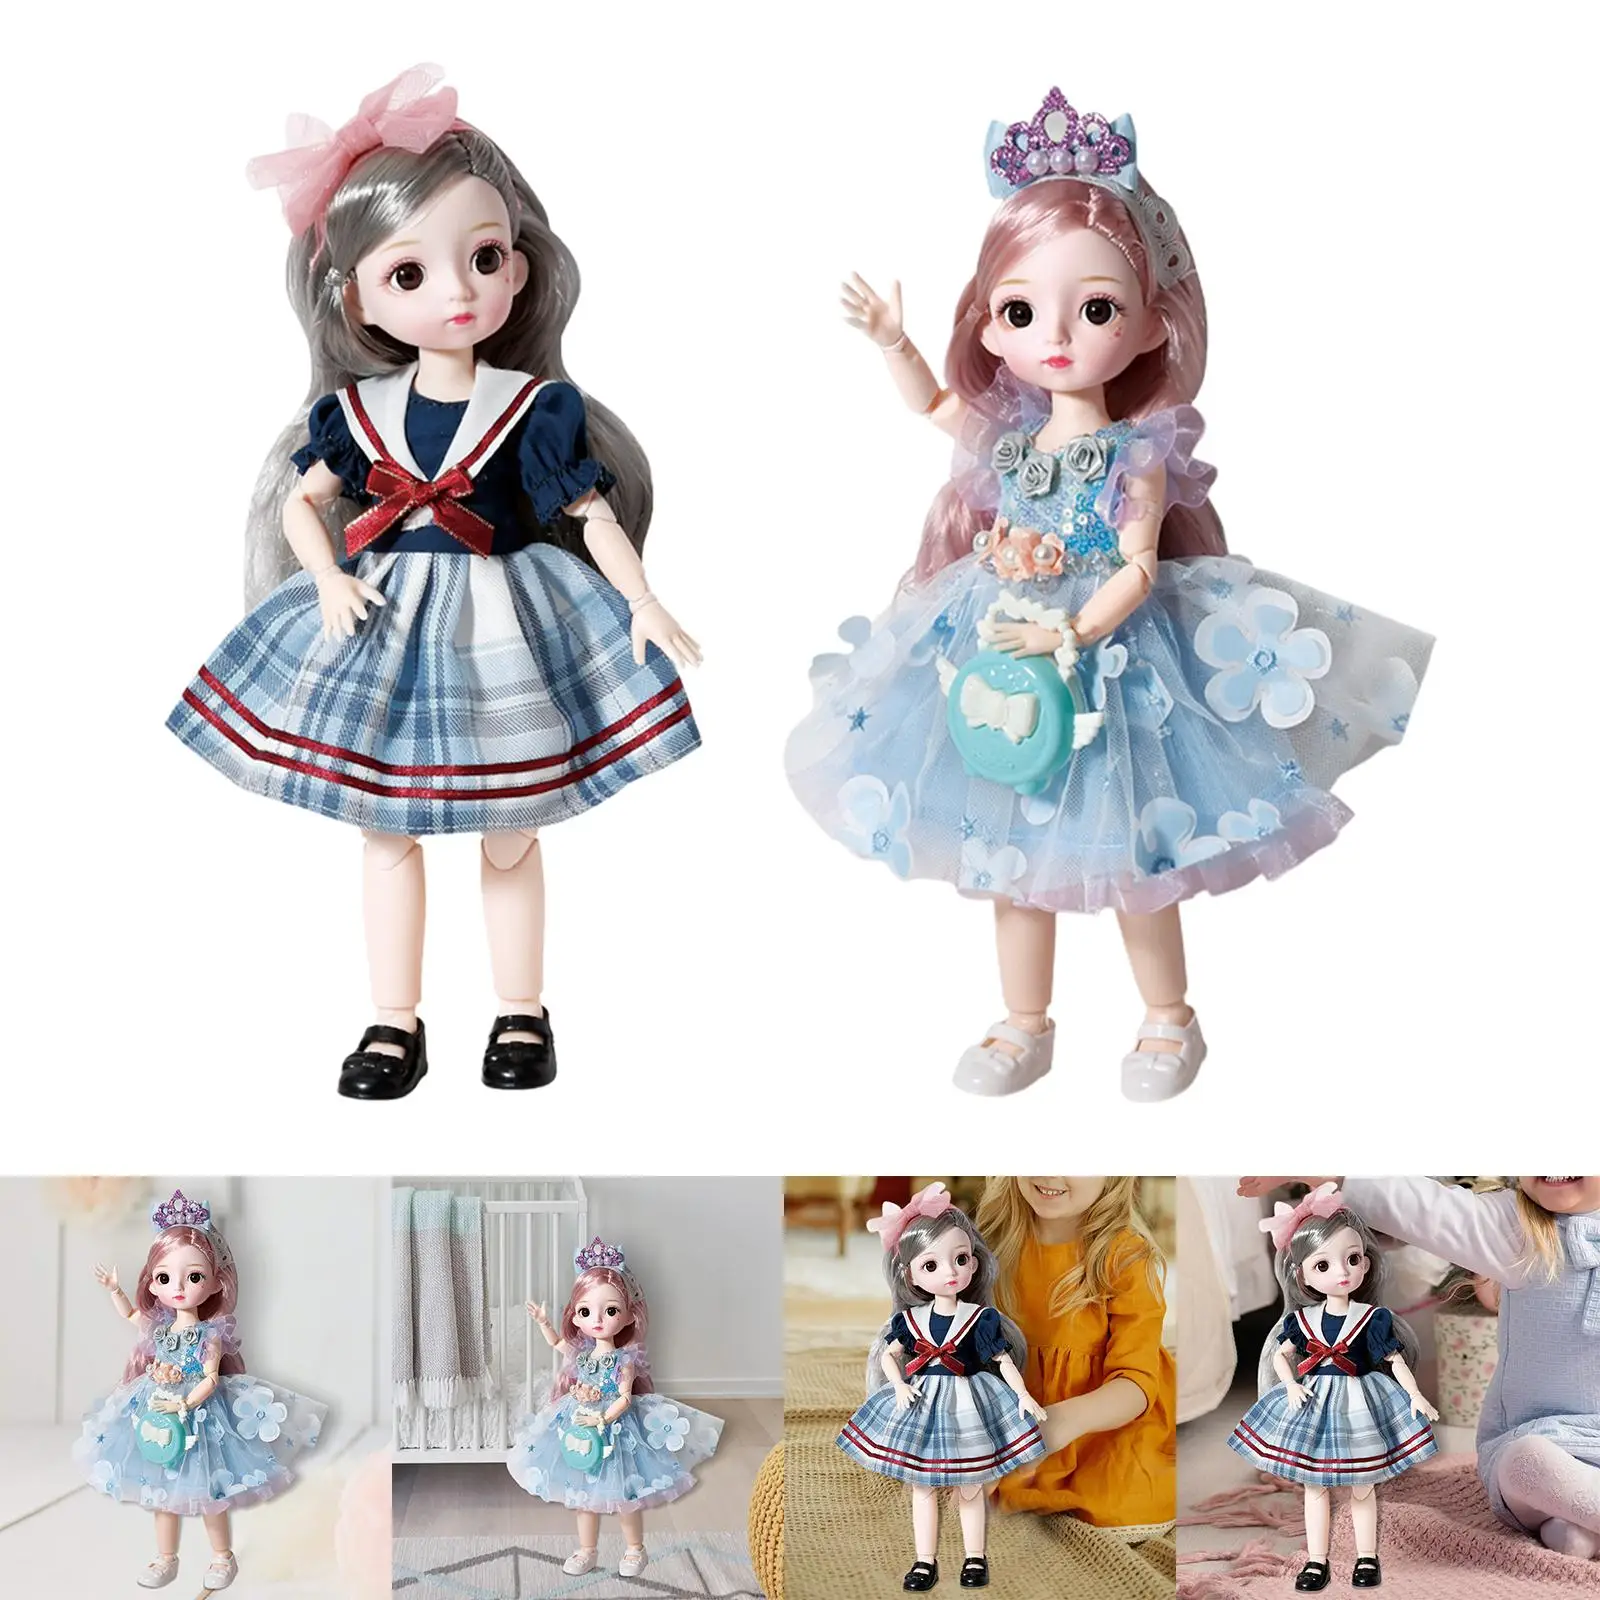 1/6 31cm Fashion Doll Fashion Outfits Smooth Hair 3D Eyes Makeup 23 Flexible Joints Princess Doll Adorable for Birthday Gift Toy